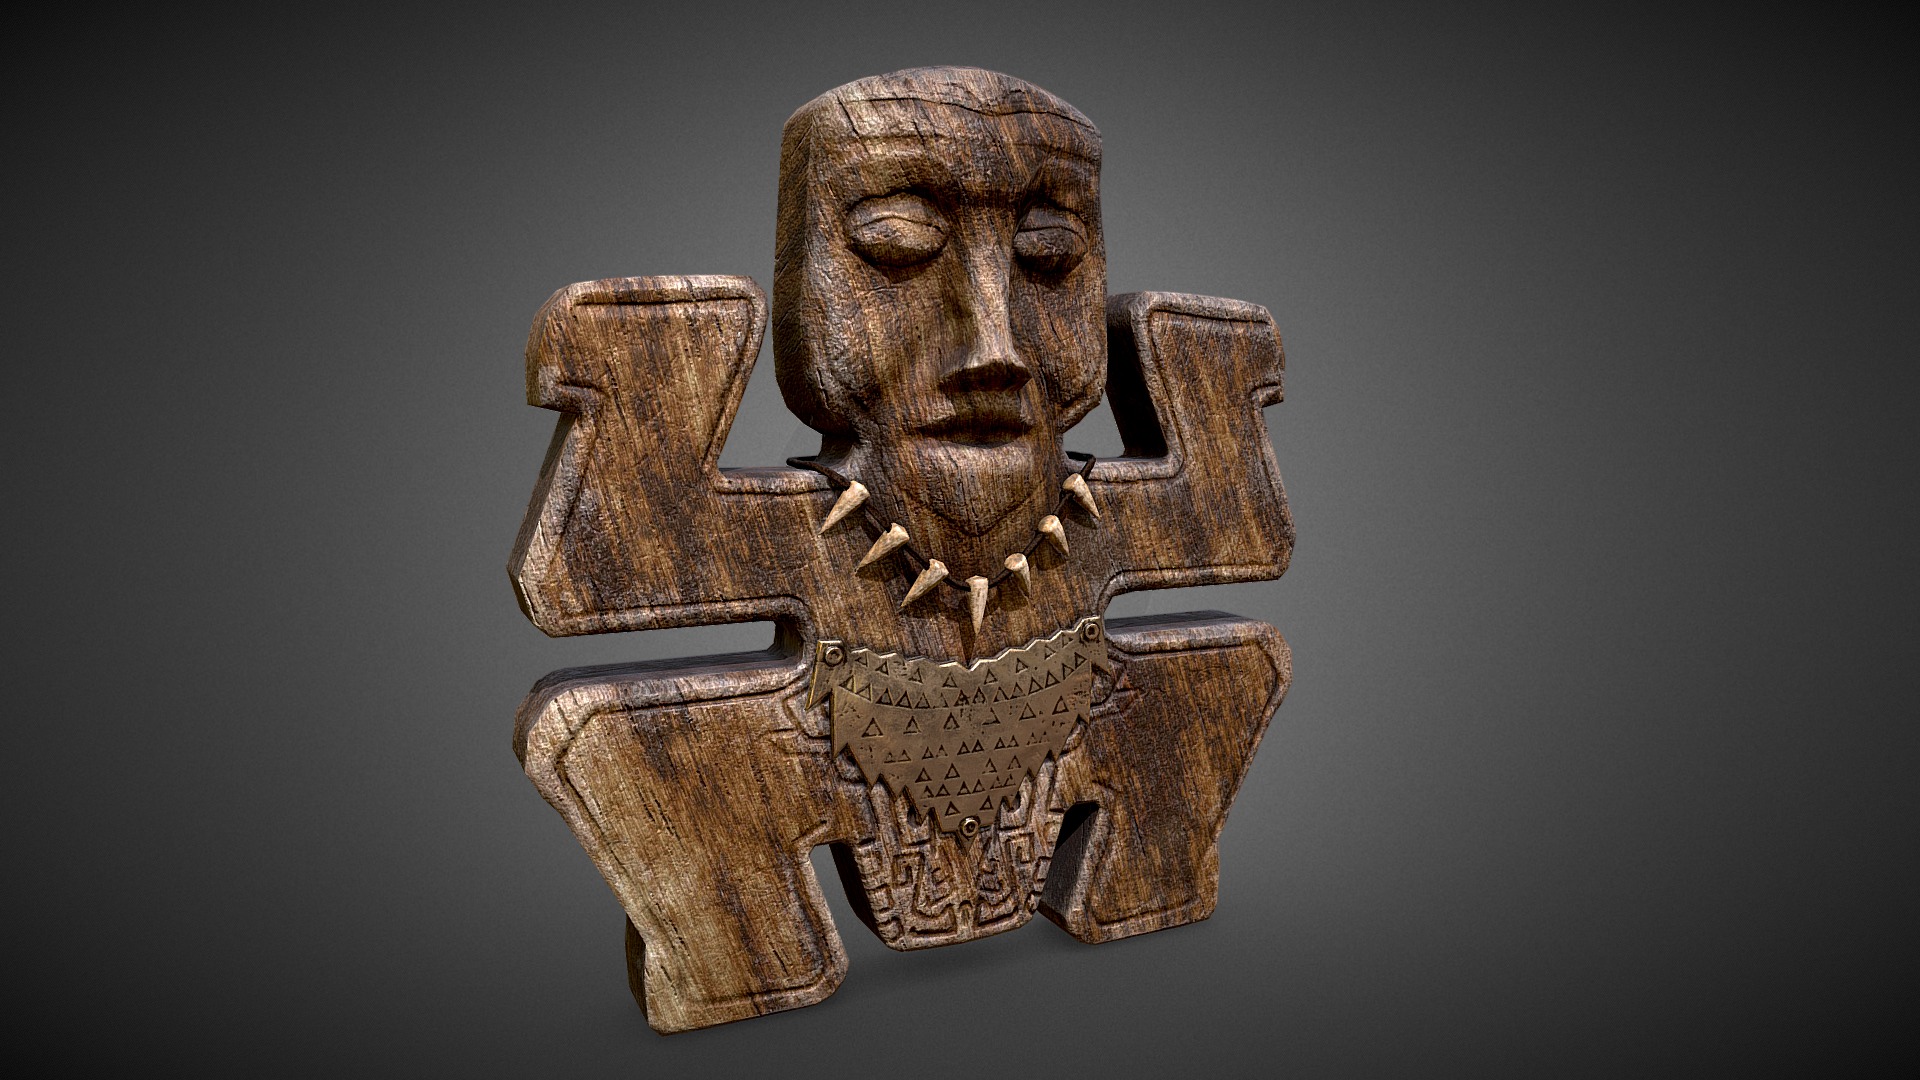 3D model Totem - This is a 3D model of the Totem. The 3D model is about a wooden carving of a person.